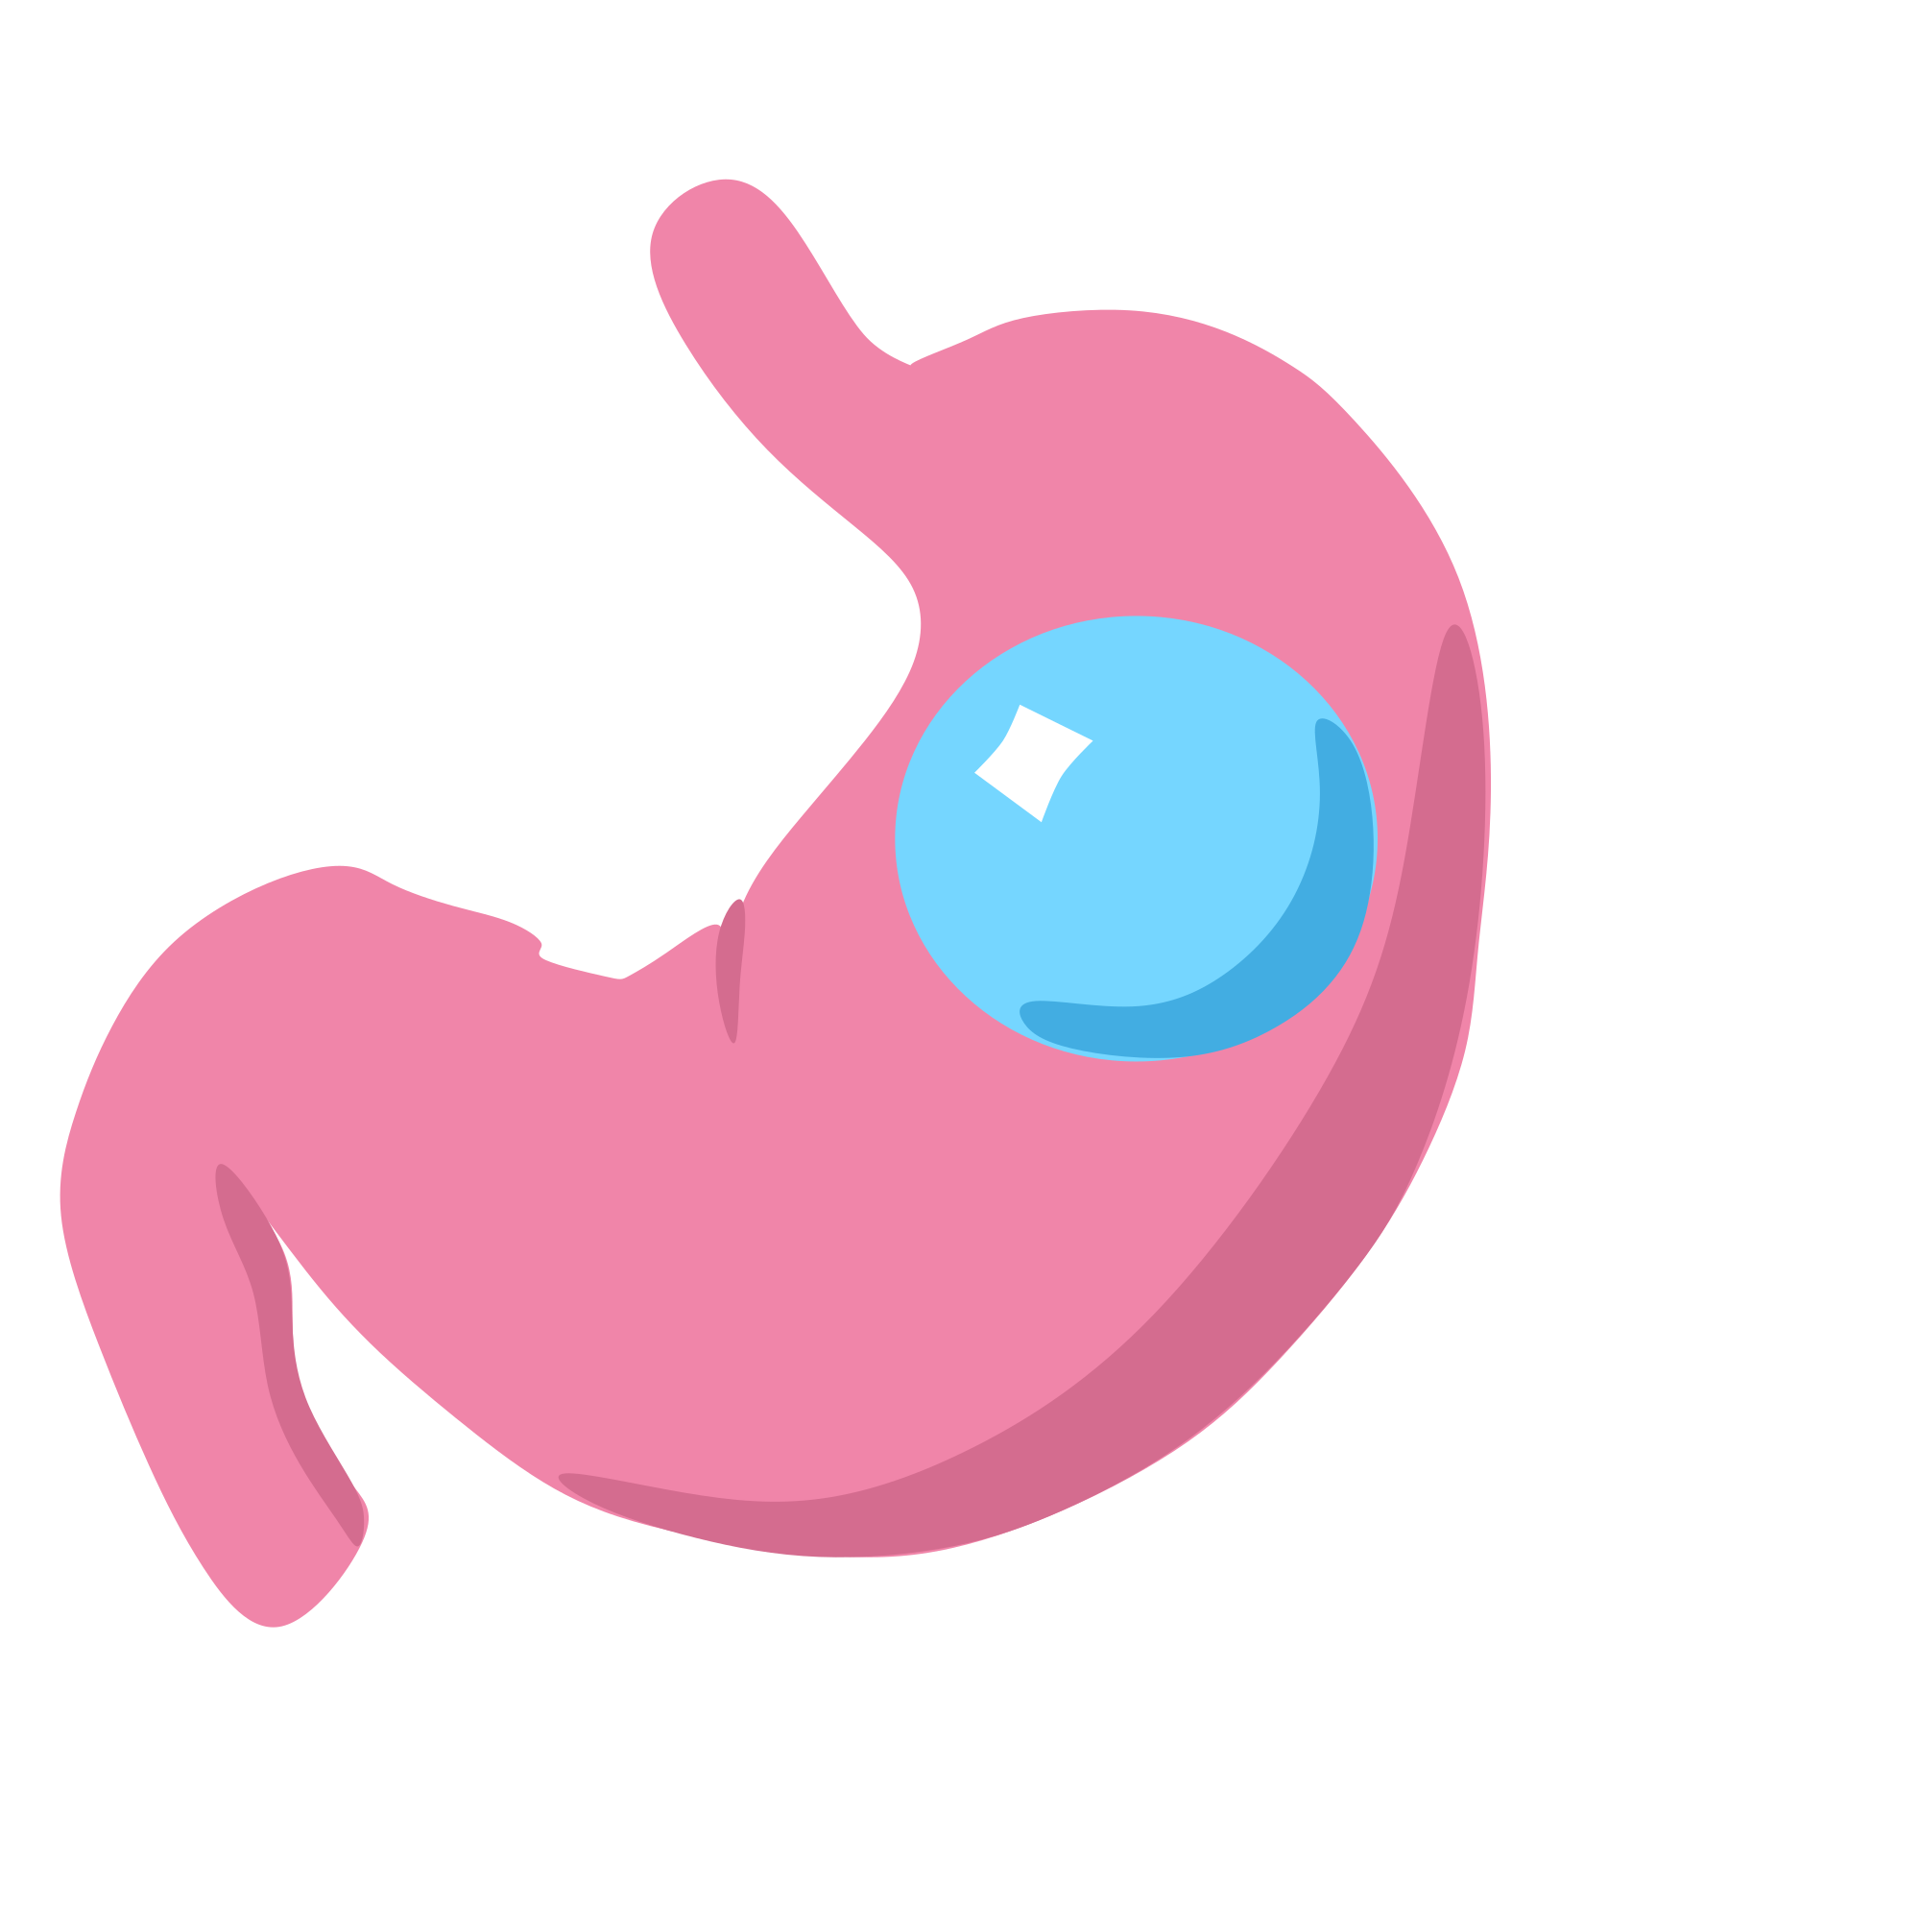 Gastric balloon wikipedia iconsvg. Danger clipart contraindication